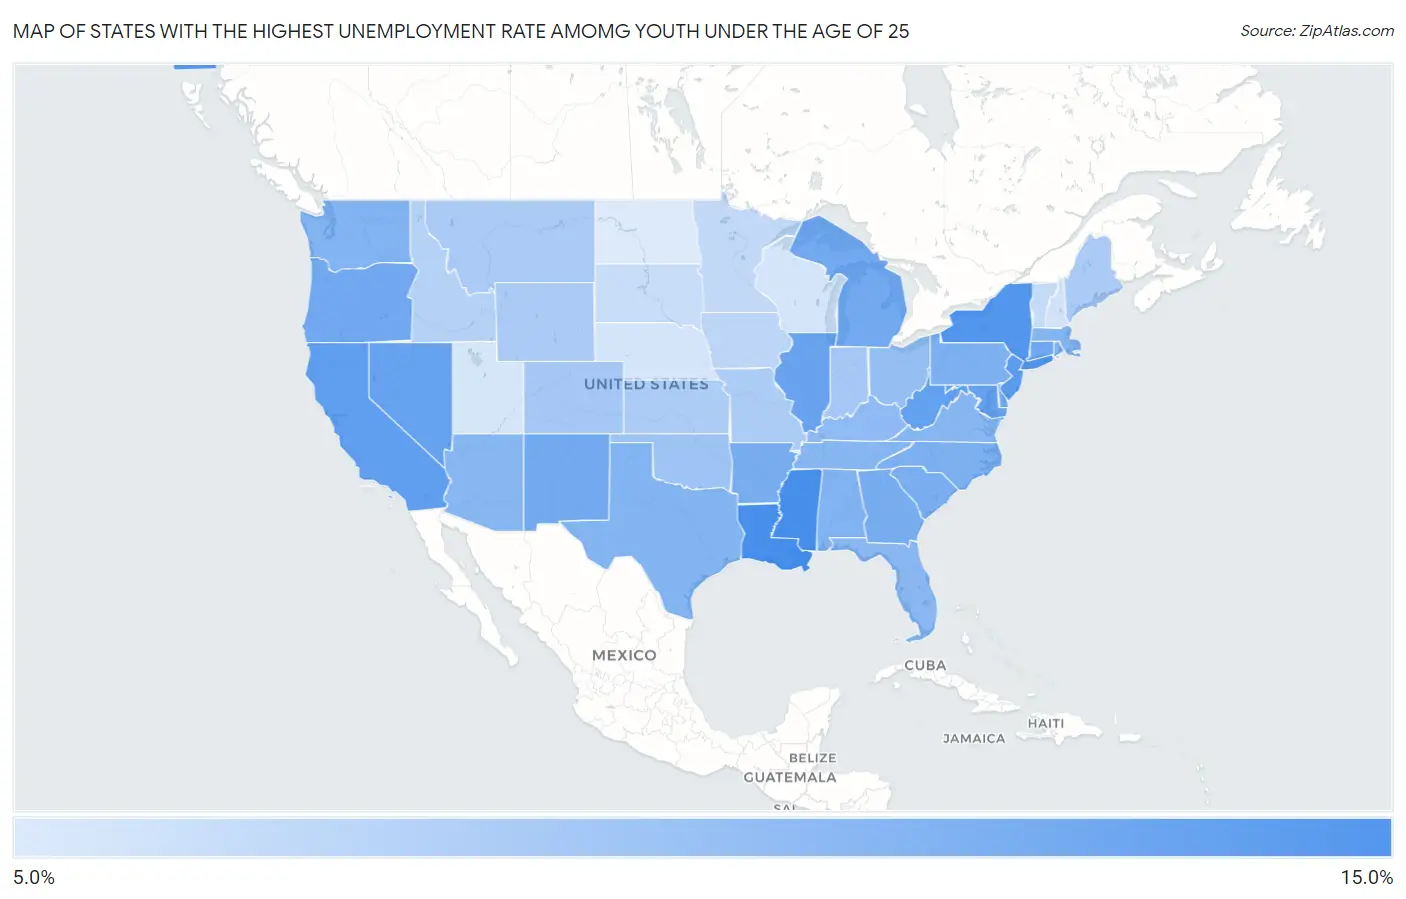 States with the Highest Unemployment Rate Amomg Youth Under the Age of 25 in the United States Map